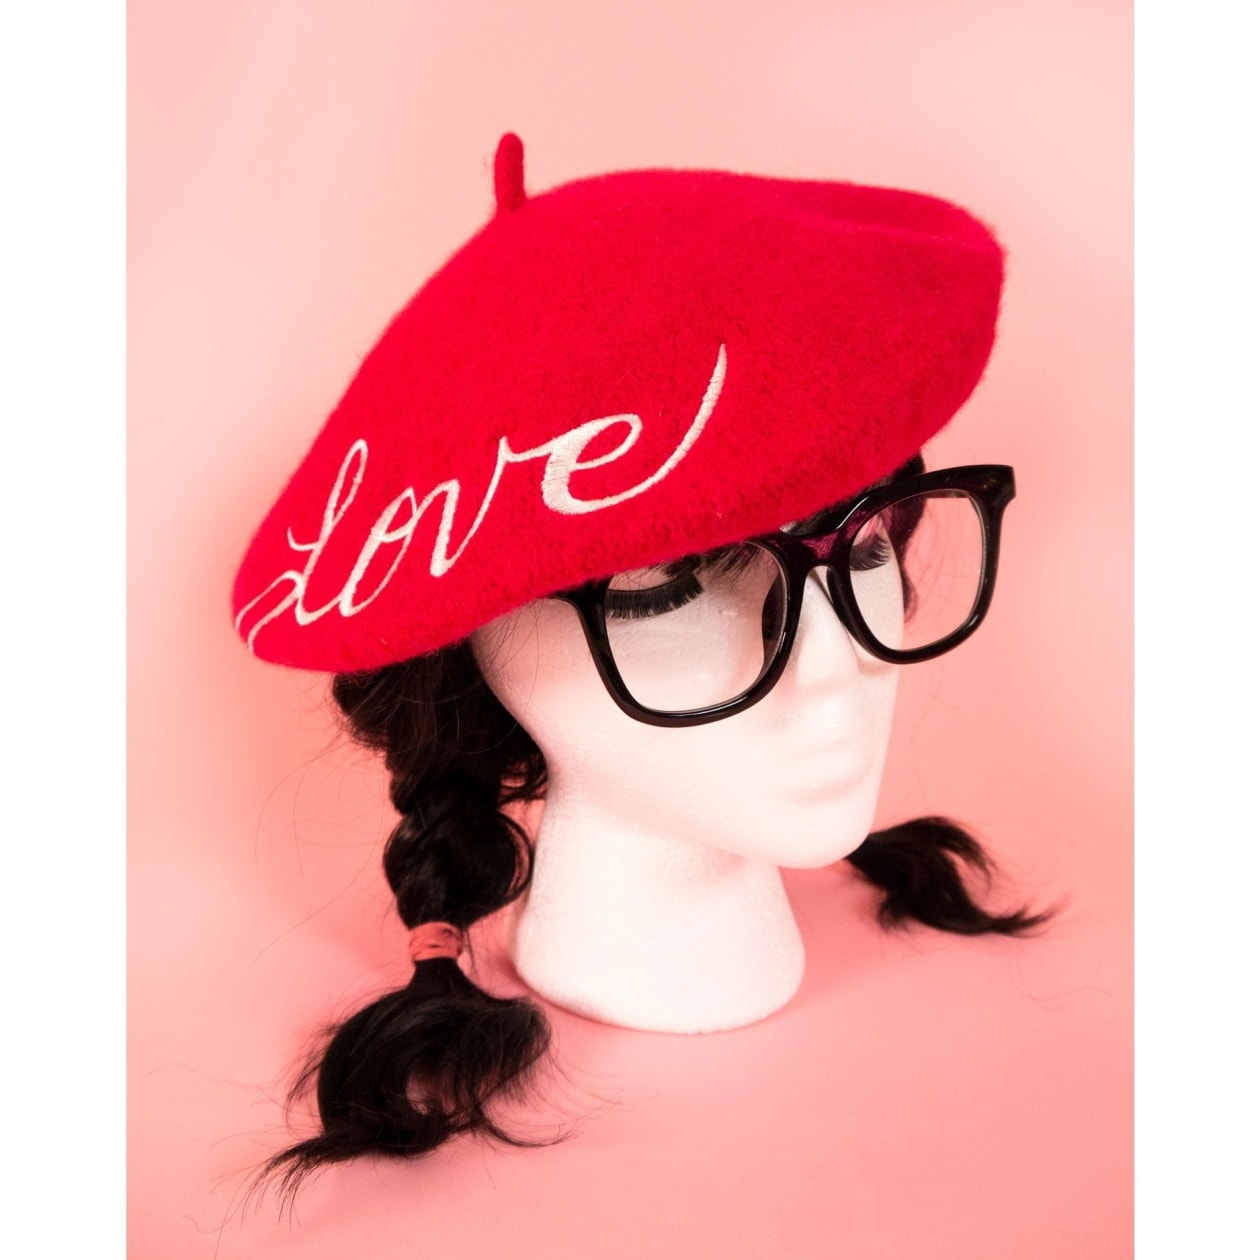 Embroidered Berets in 5 Fun Colors and Sayings | Wool and Nylon - Color: Red